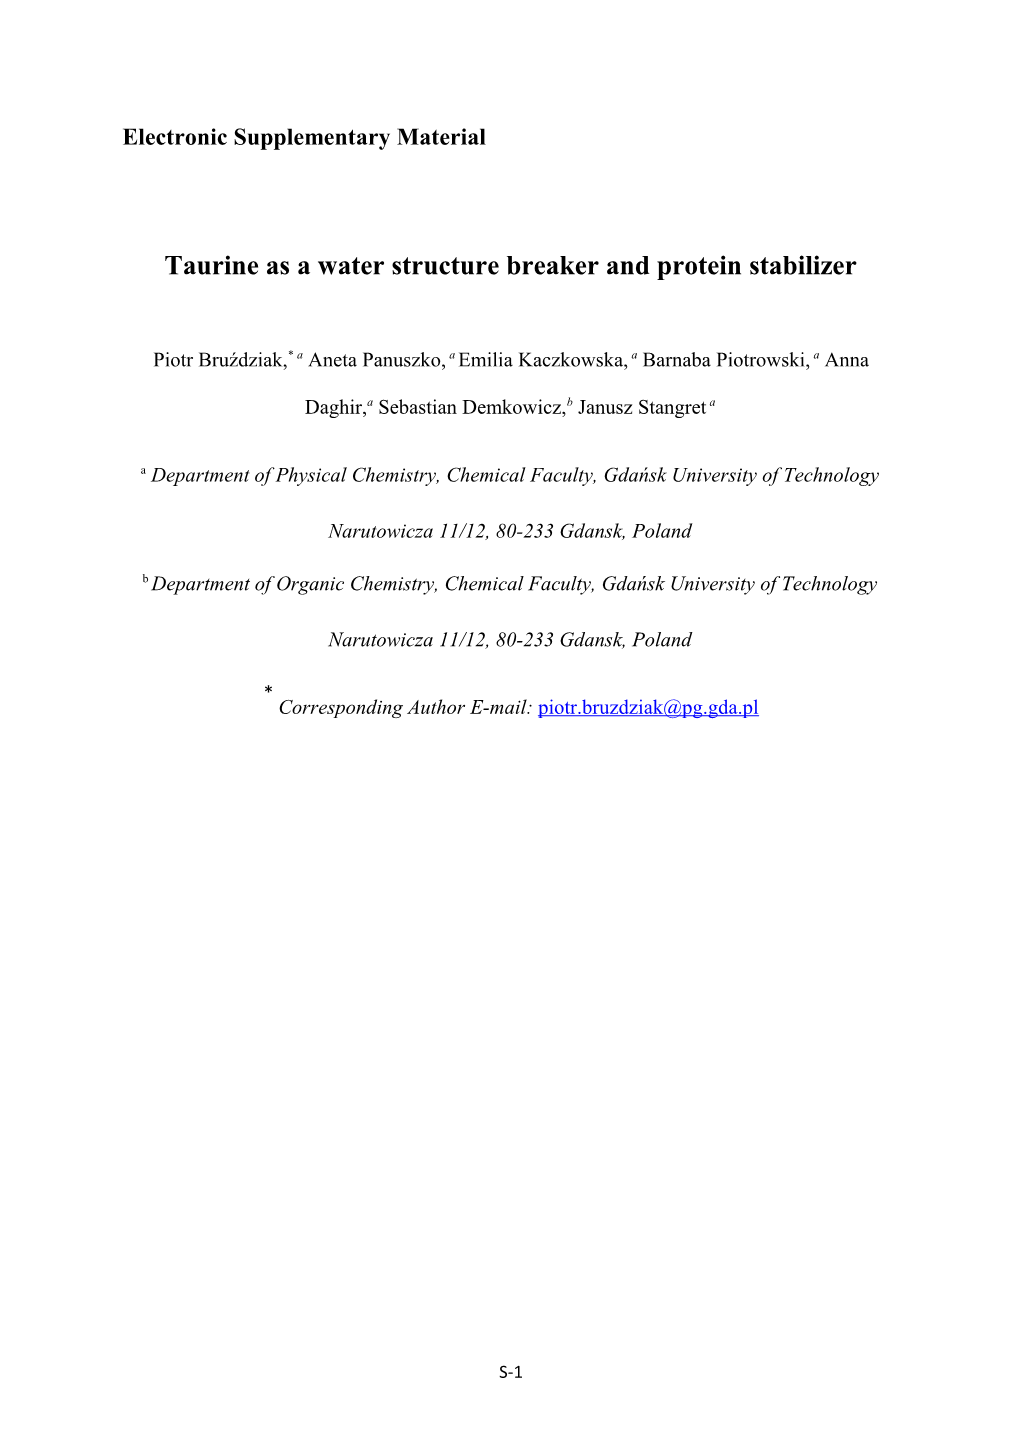 Taurine As a Water Structure Breaker and Protein Stabilizer